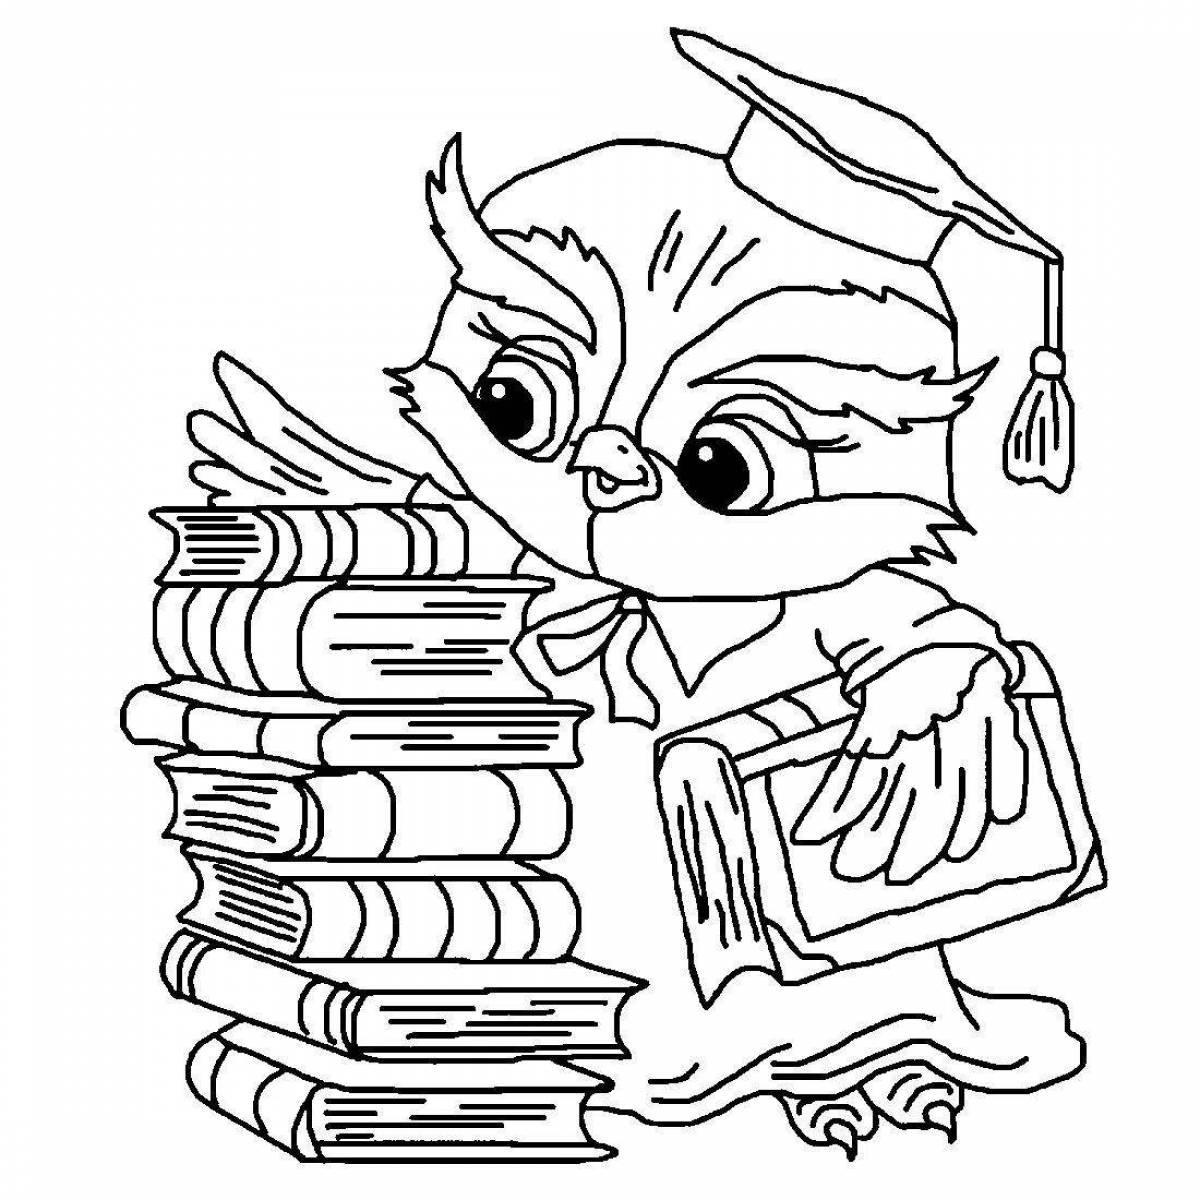 Bright wise owl coloring book for kids